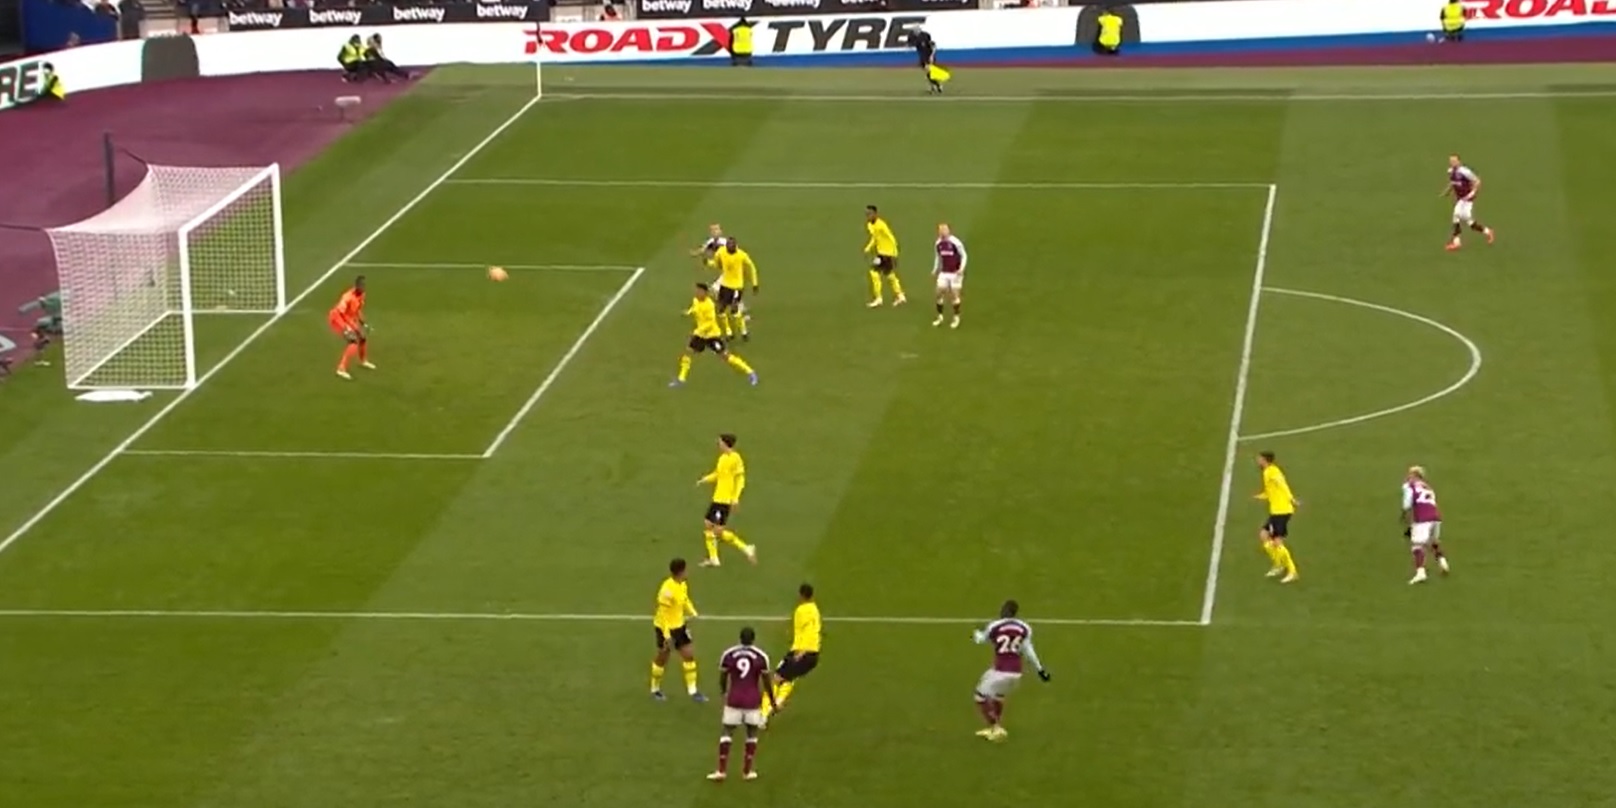 (Video) The insane West Ham goal that seals win v Chelsea & hands Liverpool big opportunity